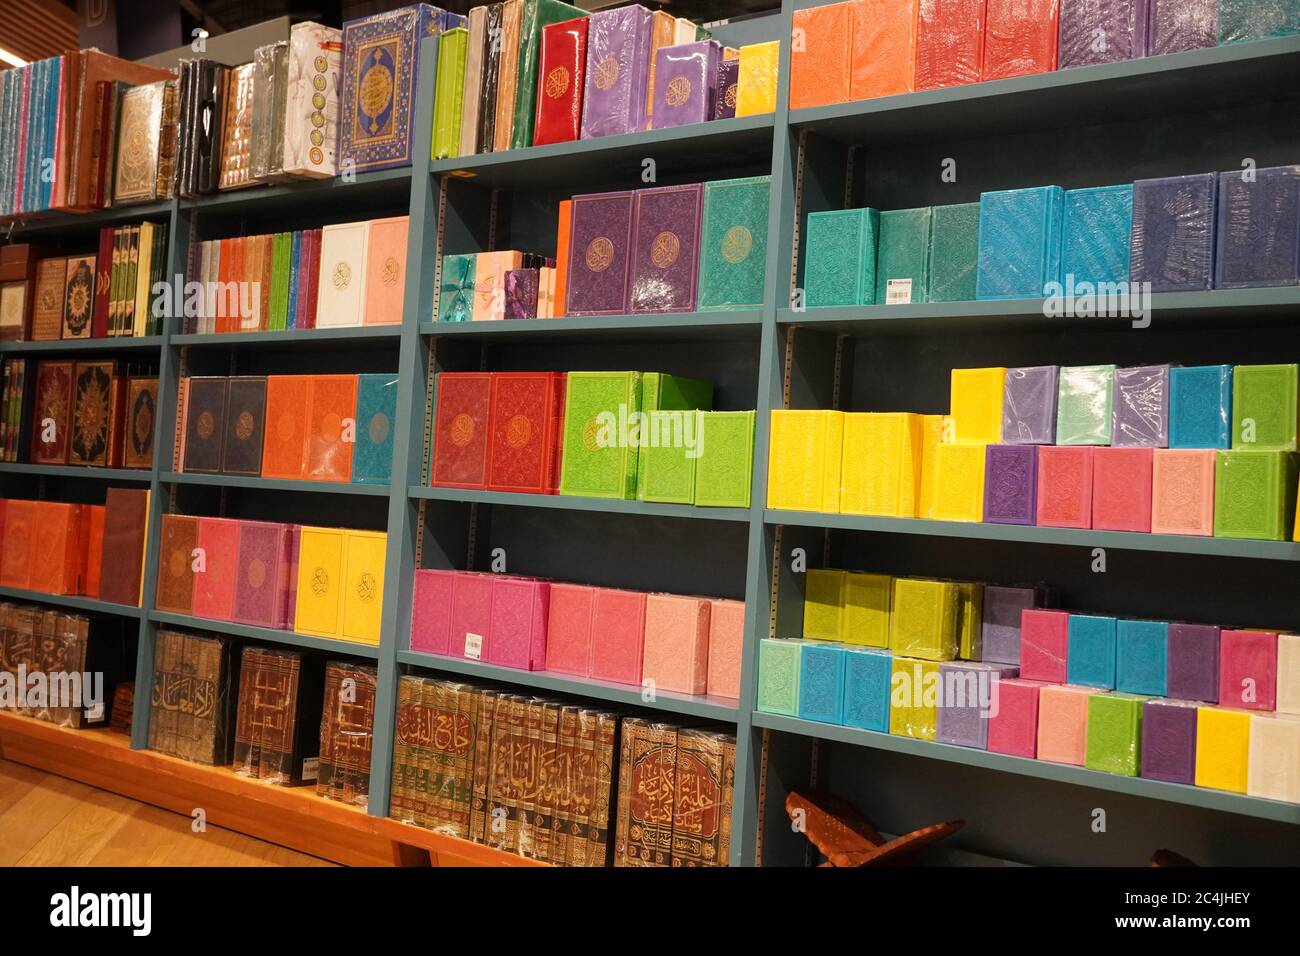 Stack of Quran on the shelf. Quran religious book stacked in shelf for sale. Available in Various languages in a book store. Islamic books for sale, A Stock Photo